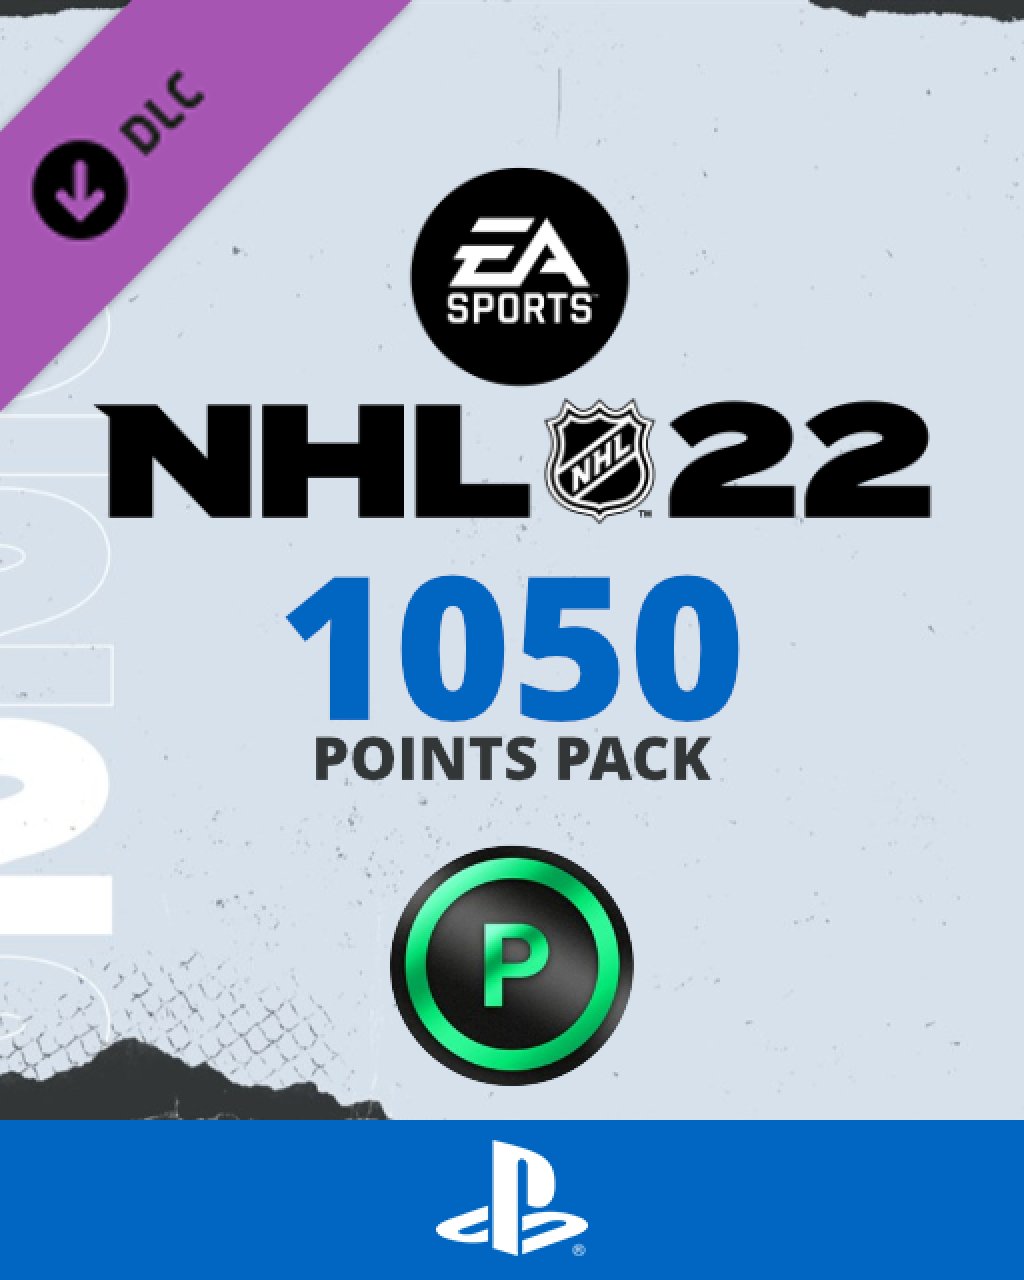 NHL 22 1050 Points Pack